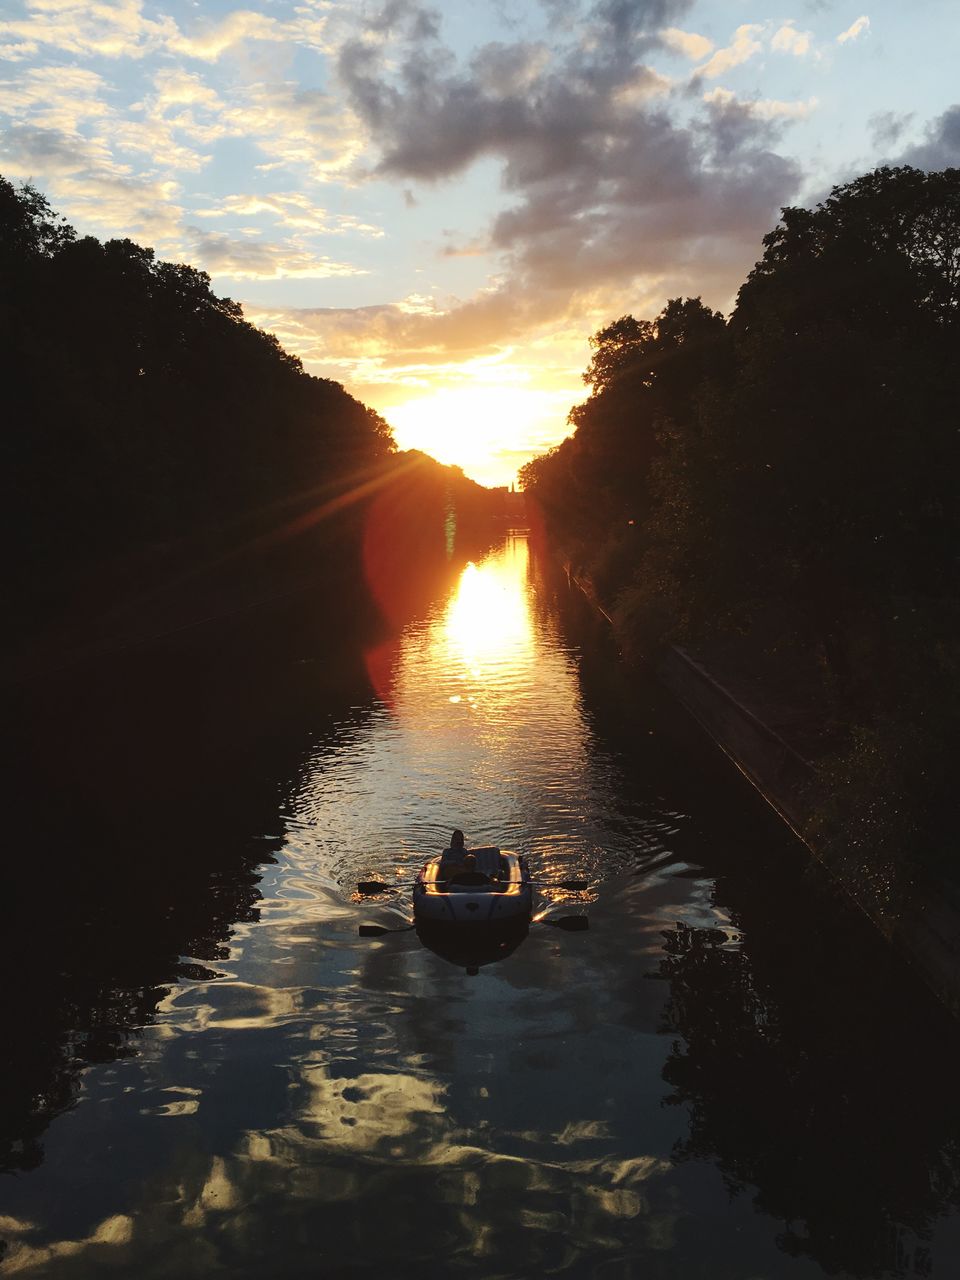 High angle view of people boating on river during sunset